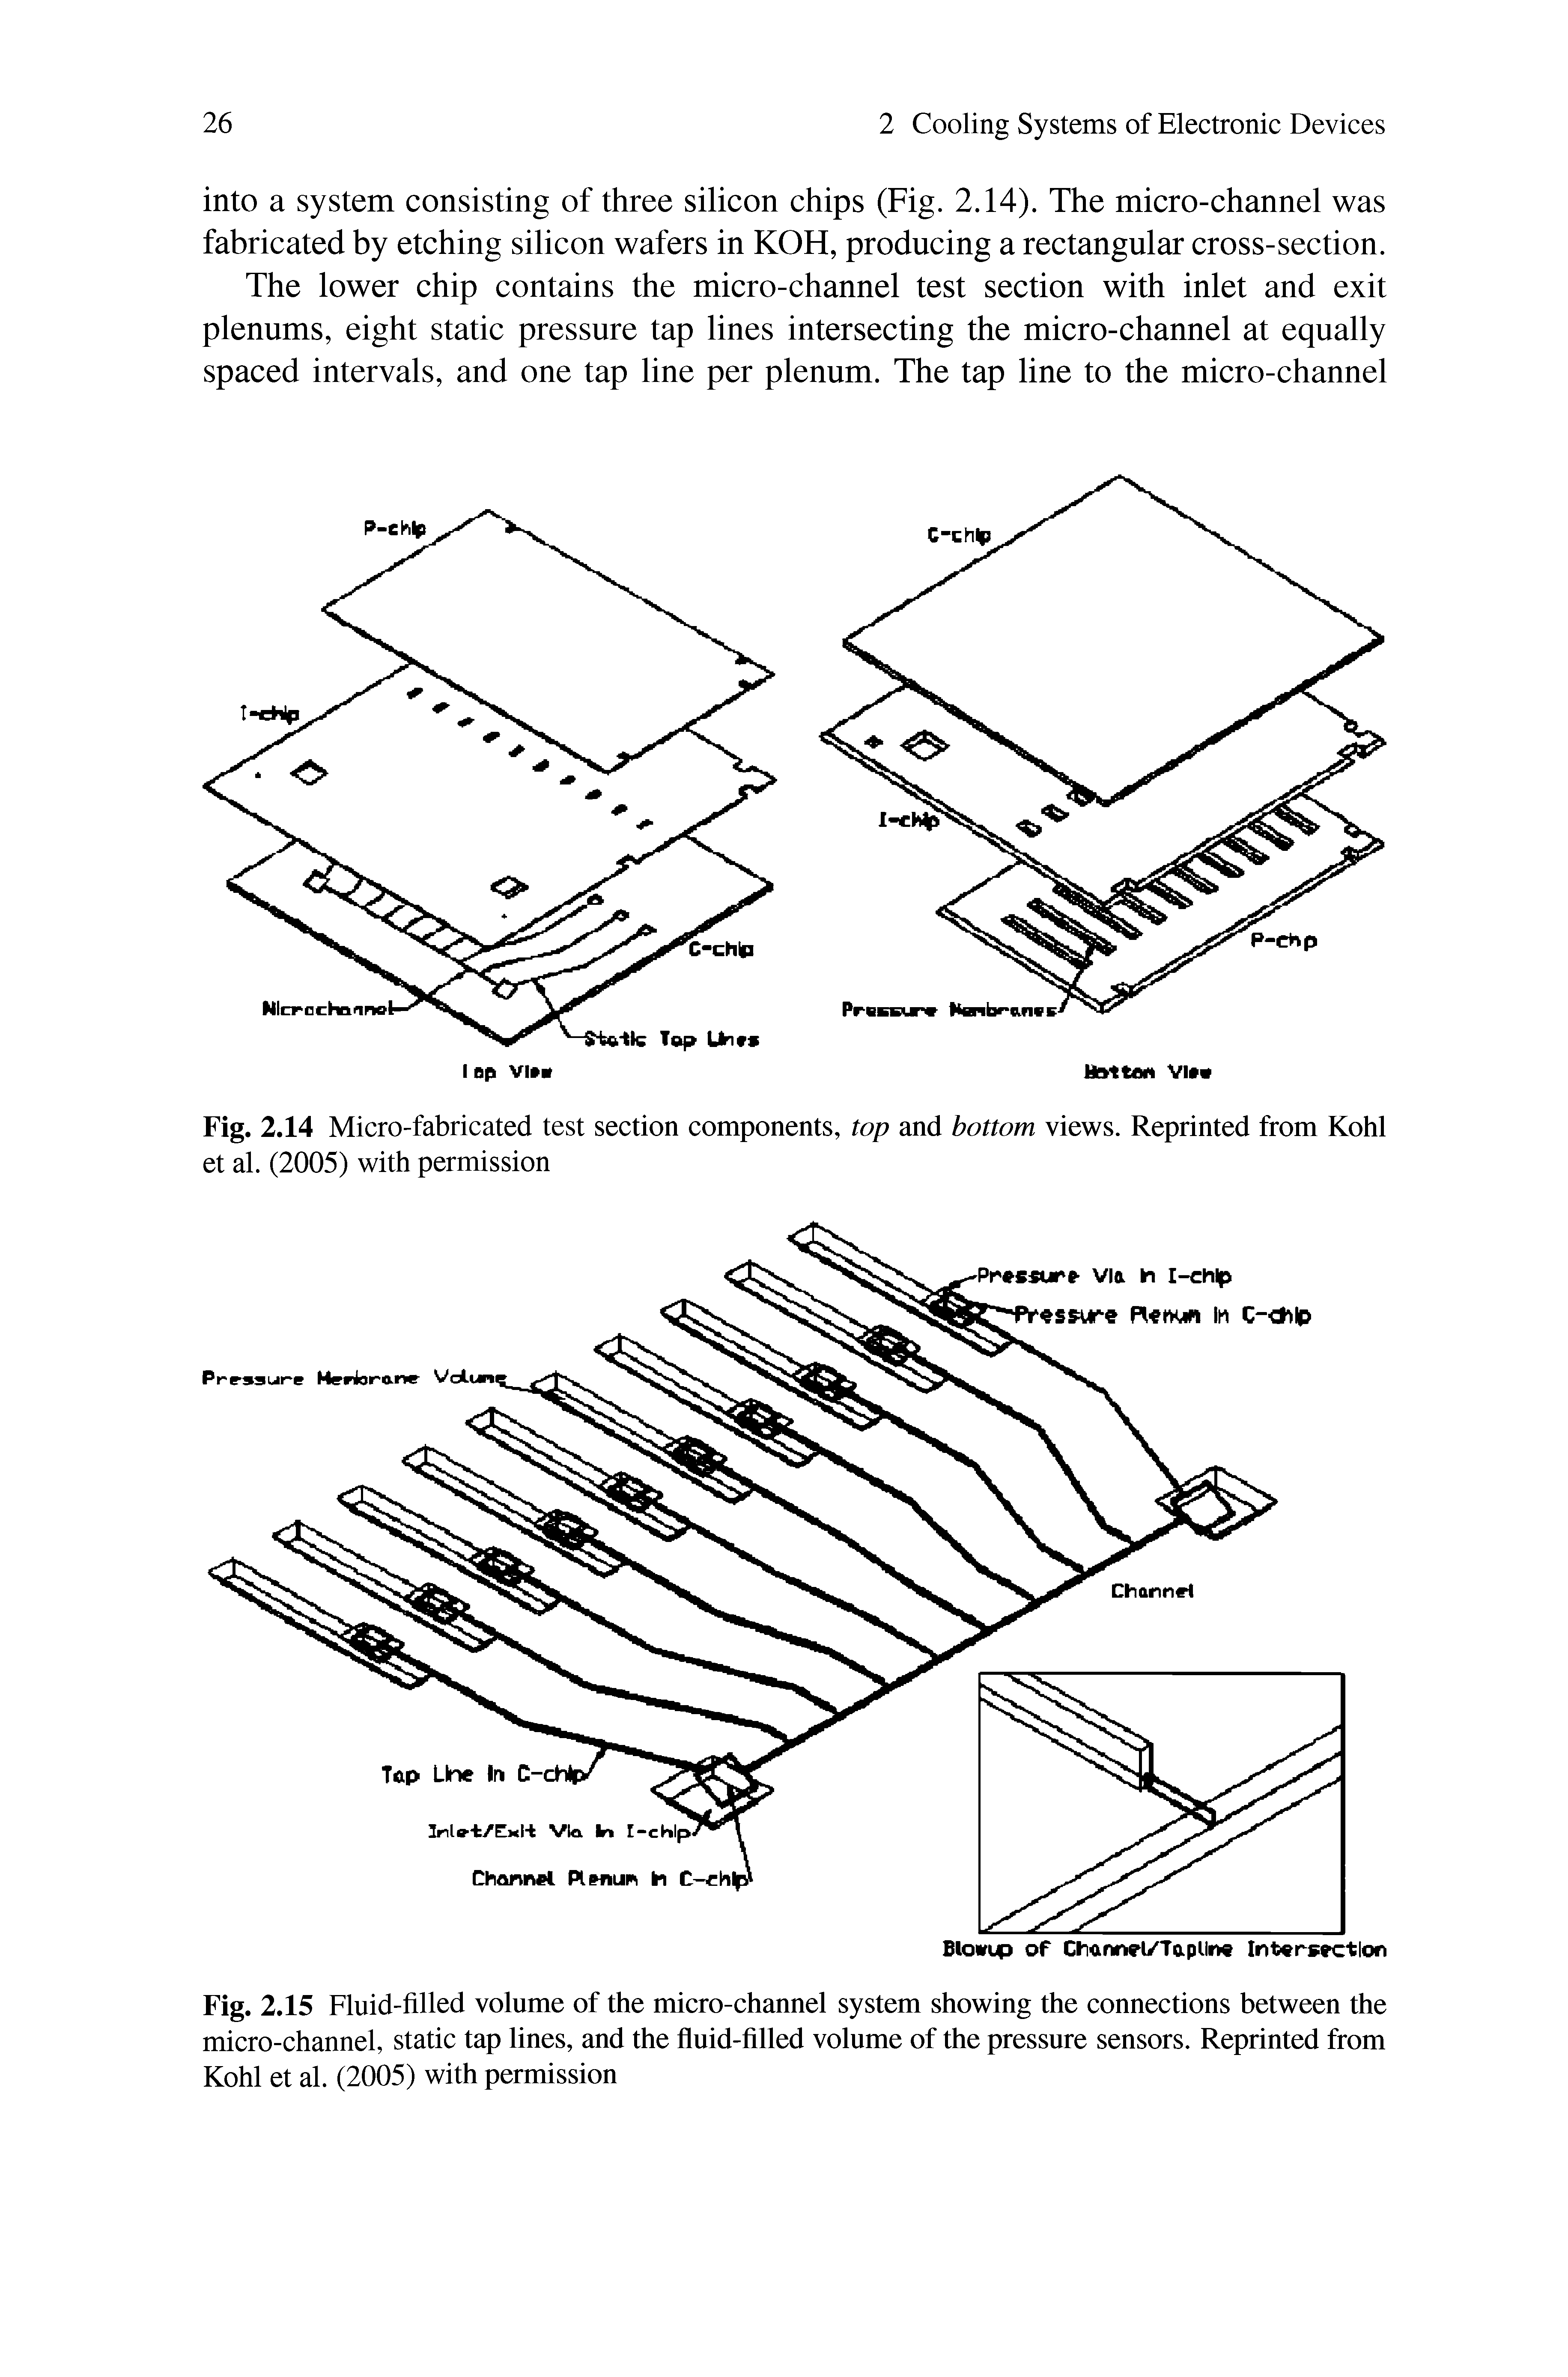 Fig. 2.14 Micro-fabricated test section components, top and bottom views. Reprinted from Kohl et al. (2005) with permission...